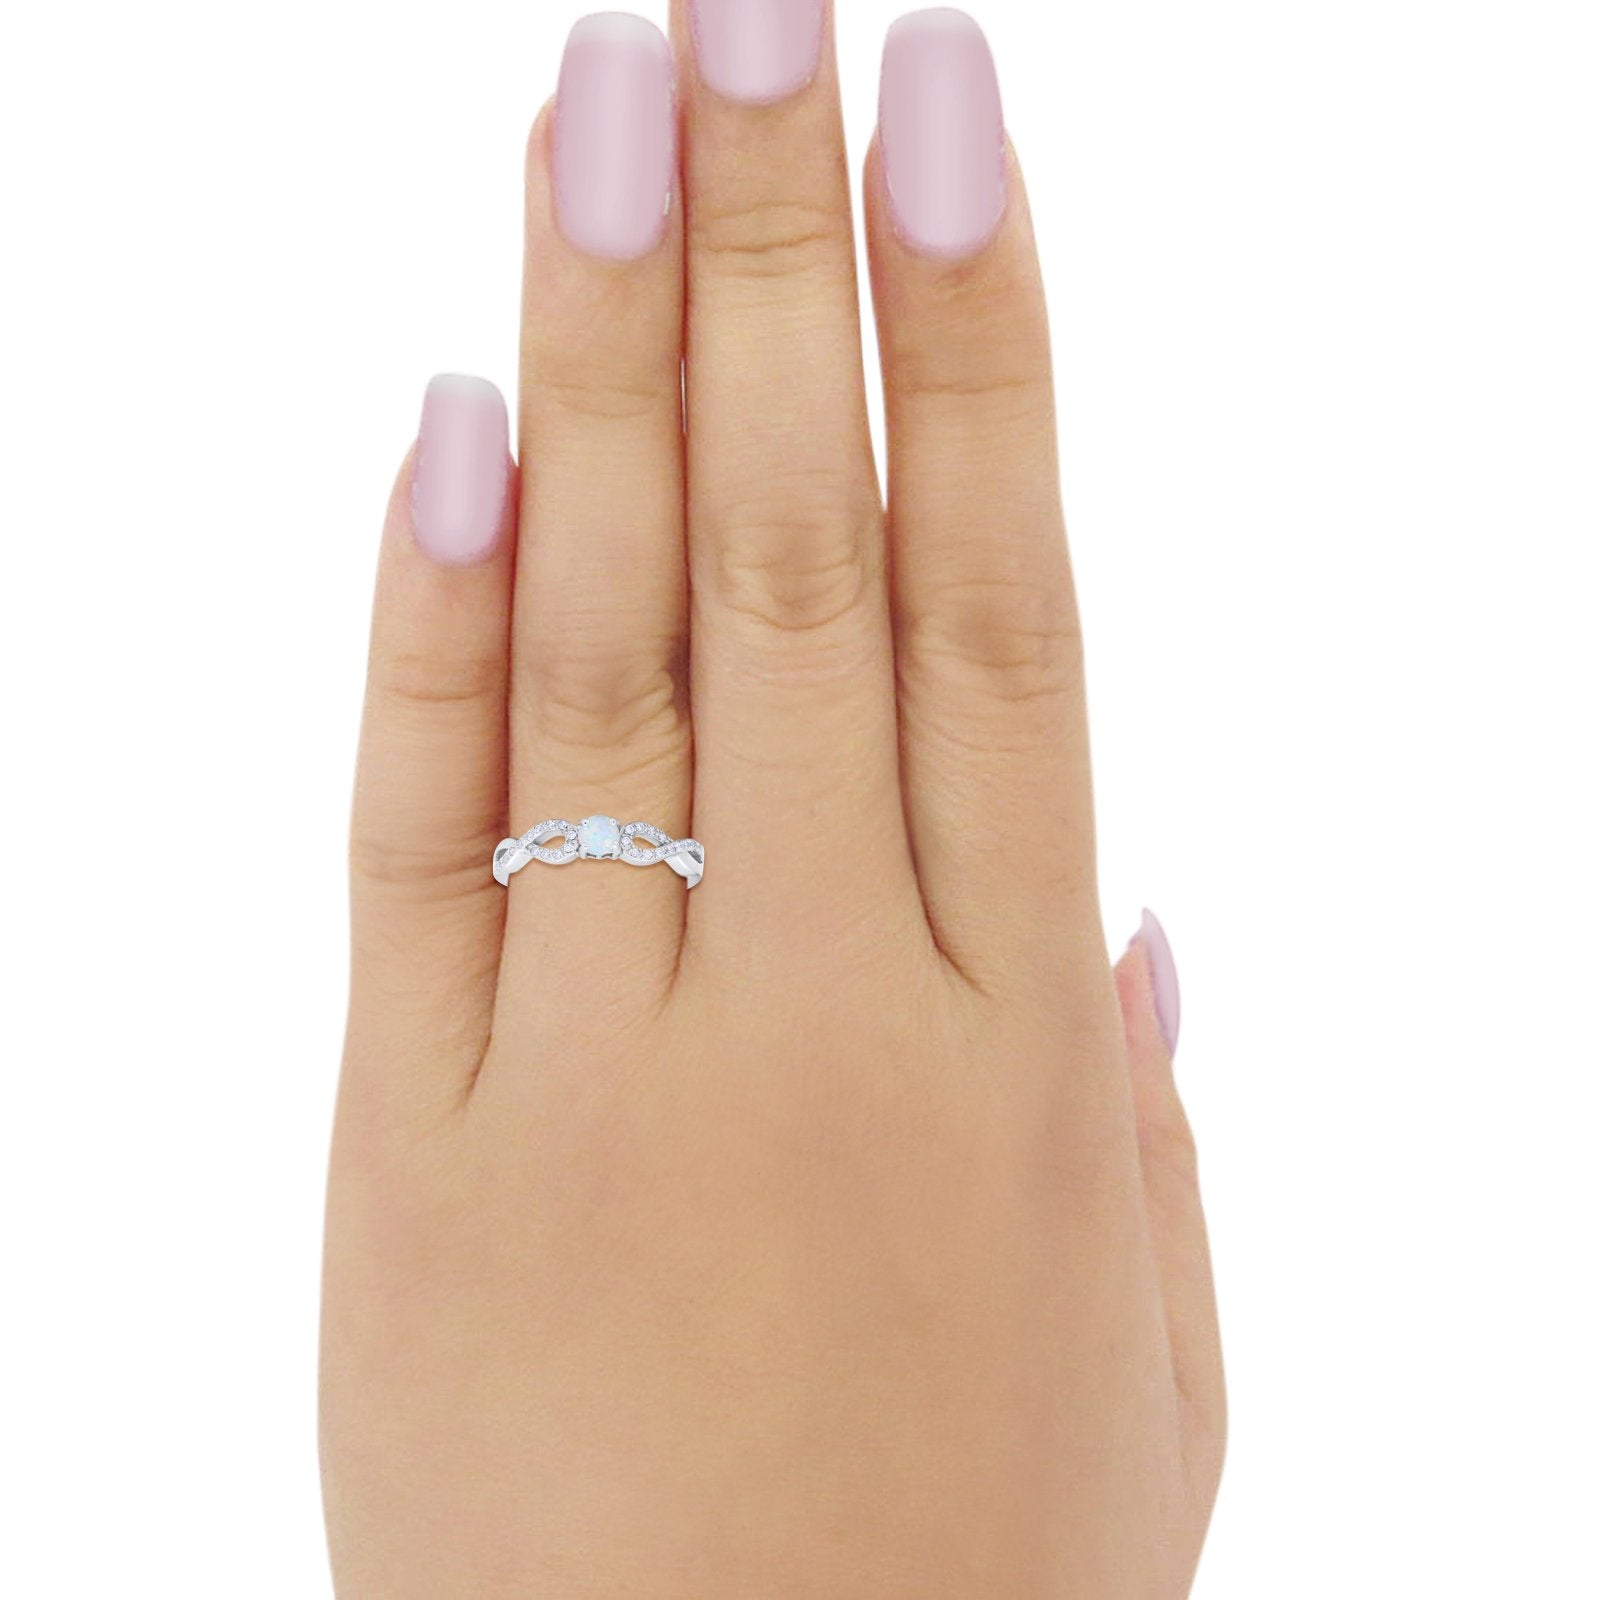 Petite Dainty Infinity Shank Ring Lab Created White Opal 925 Sterling Silver